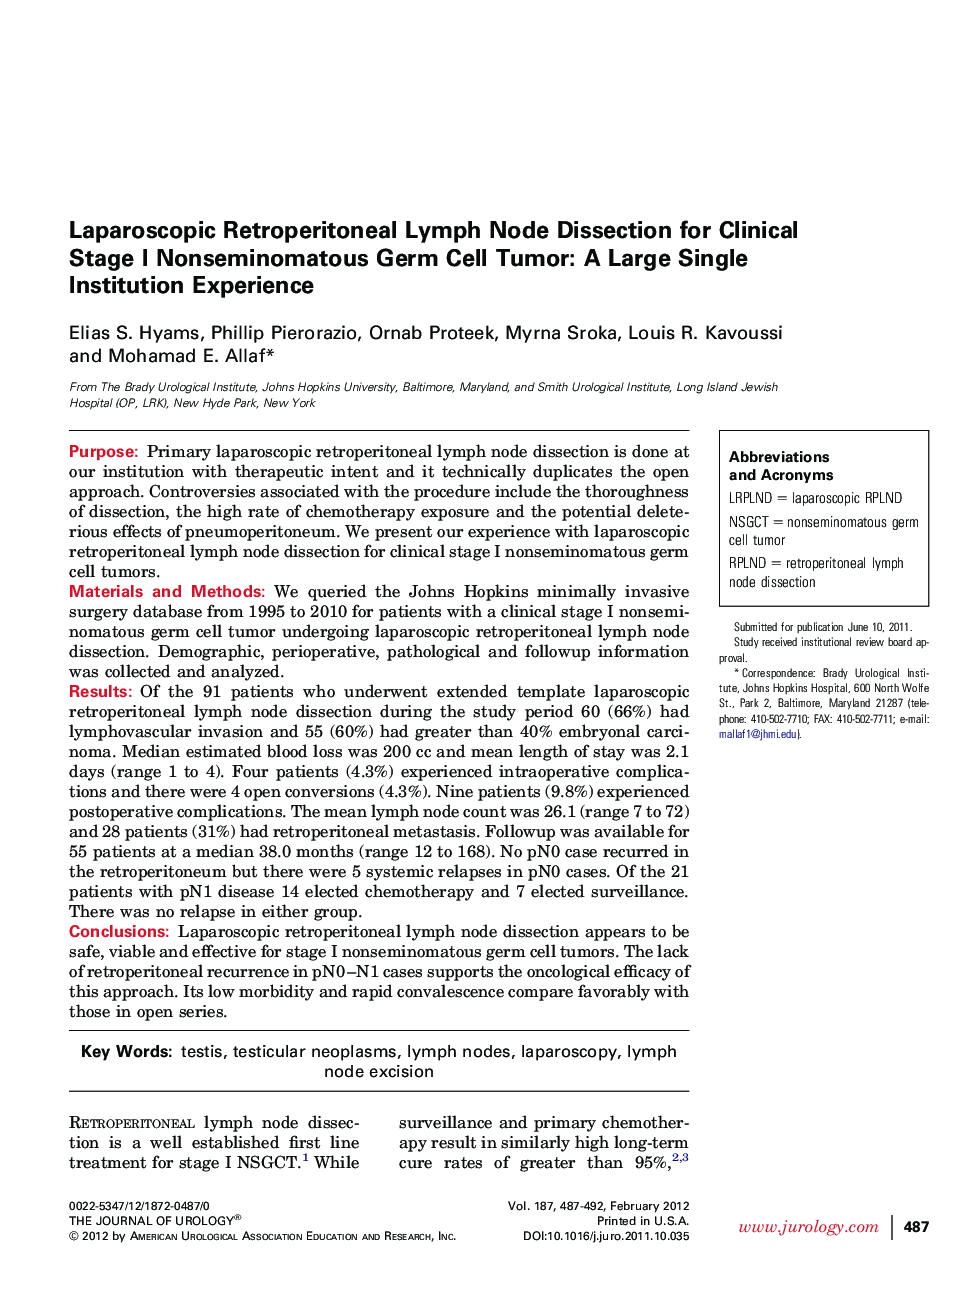 Laparoscopic Retroperitoneal Lymph Node Dissection for Clinical Stage I Nonseminomatous Germ Cell Tumor: A Large Single Institution Experience 